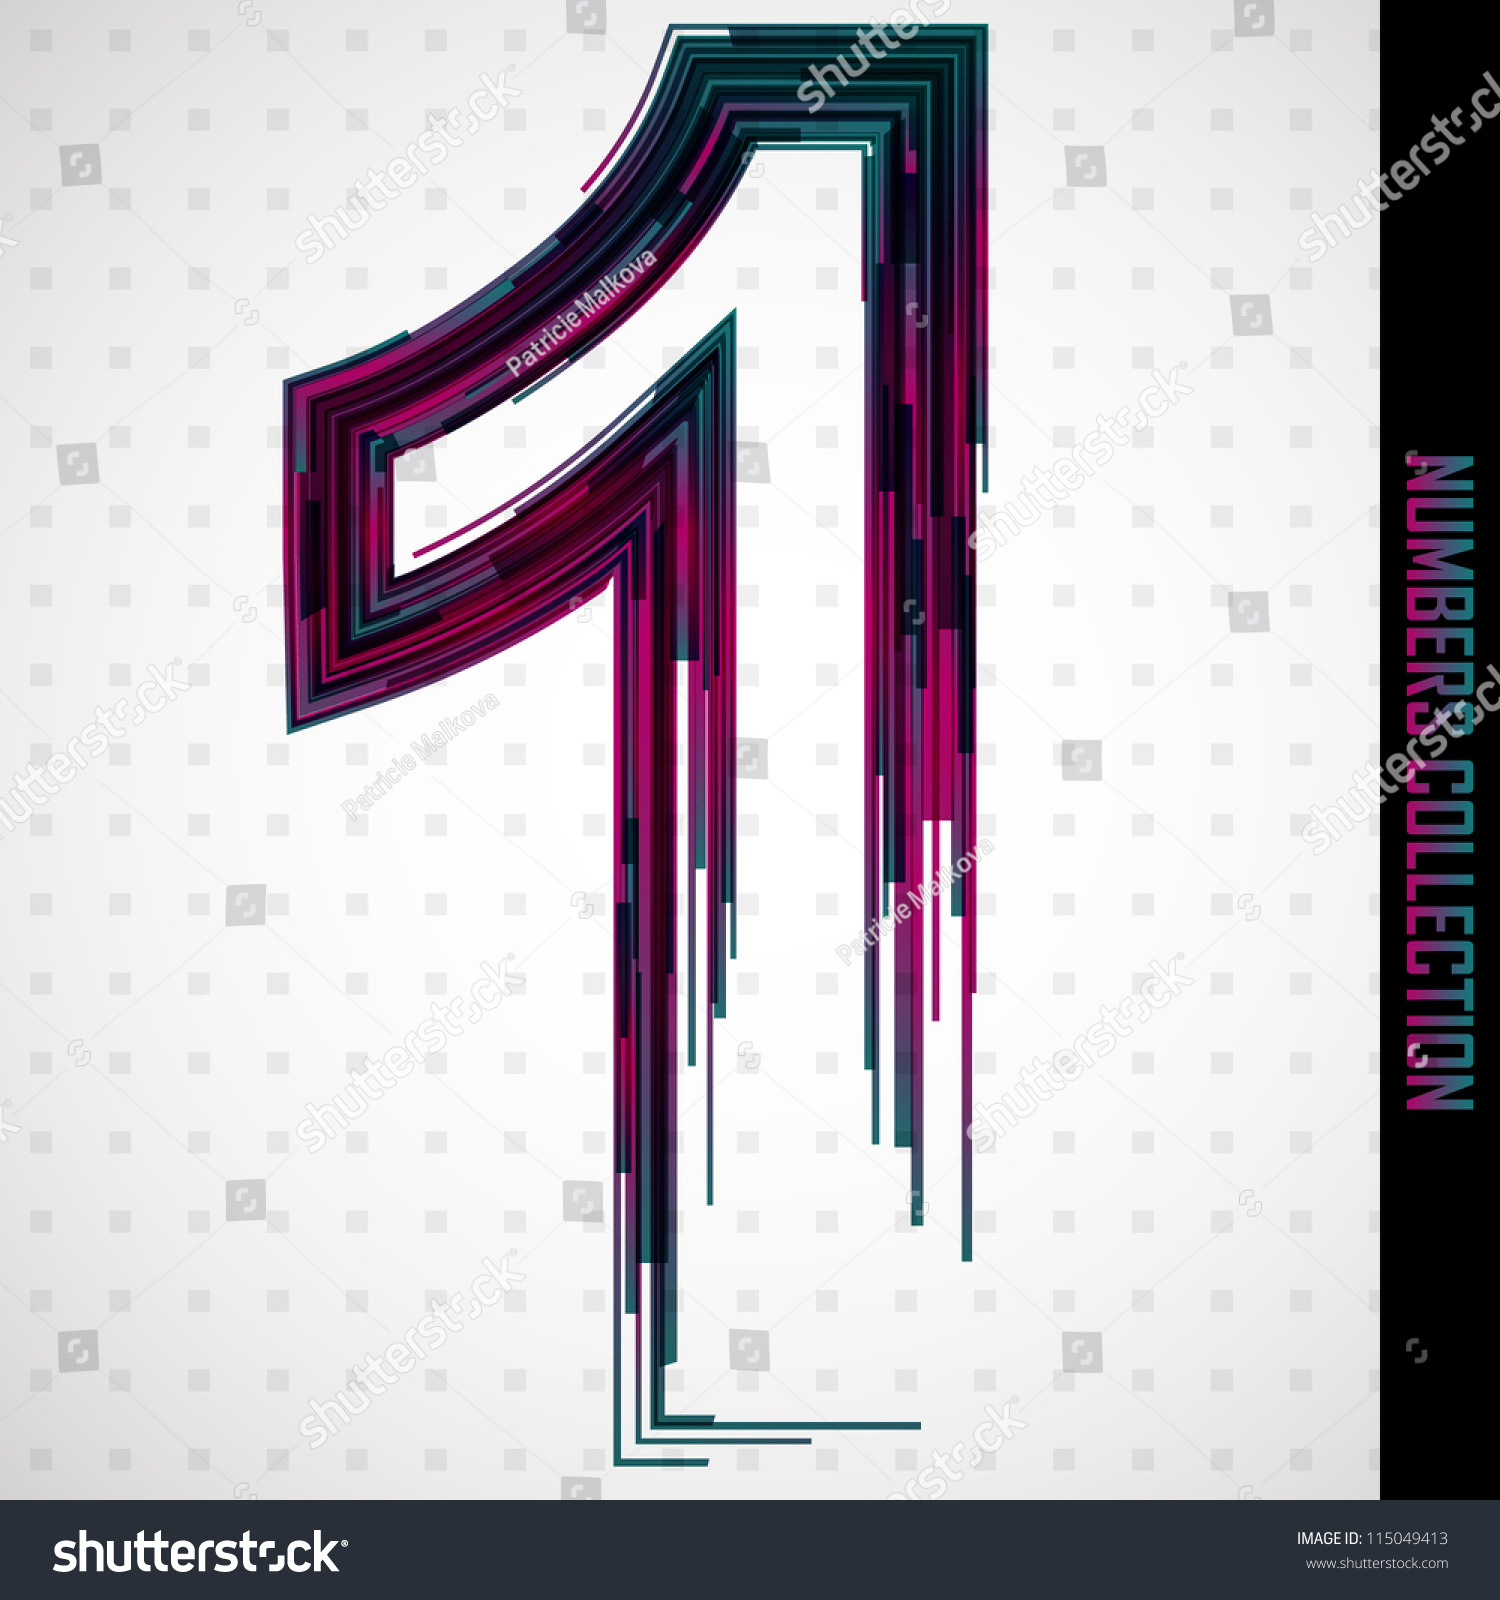 Abstract Vector Number One Numbers Set Stock Vector 115049413 ...